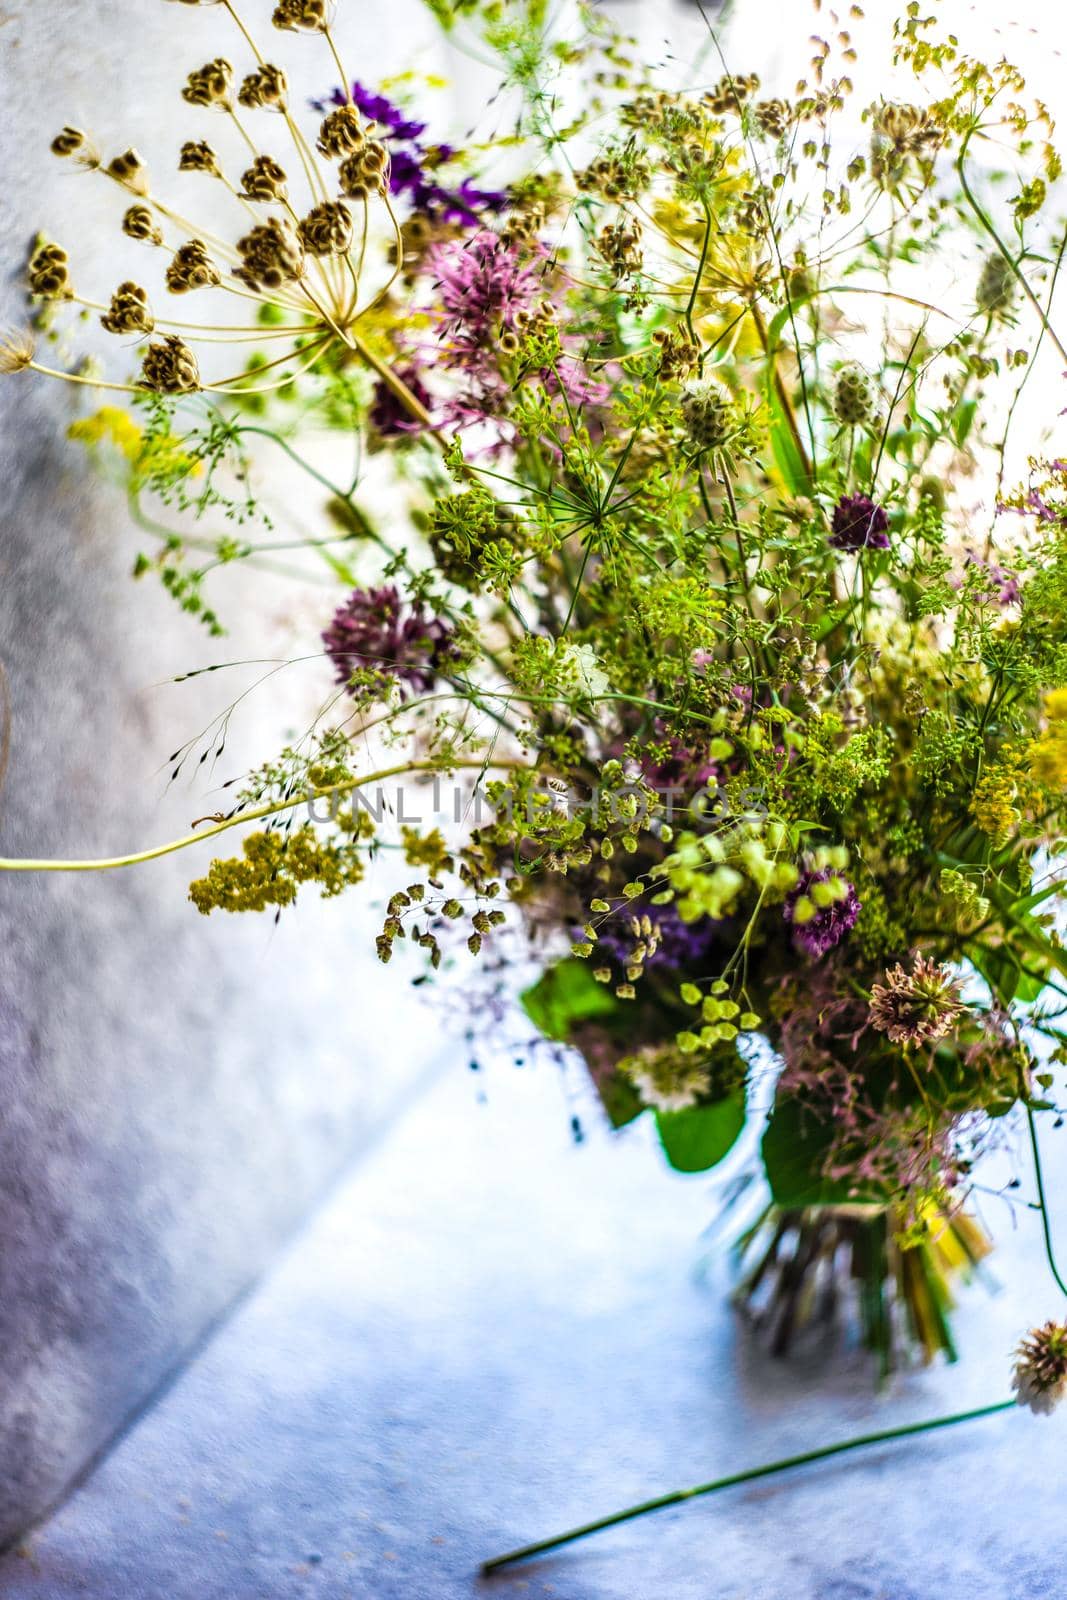 Summer wild flowers in bouquet as a gift concept in interior